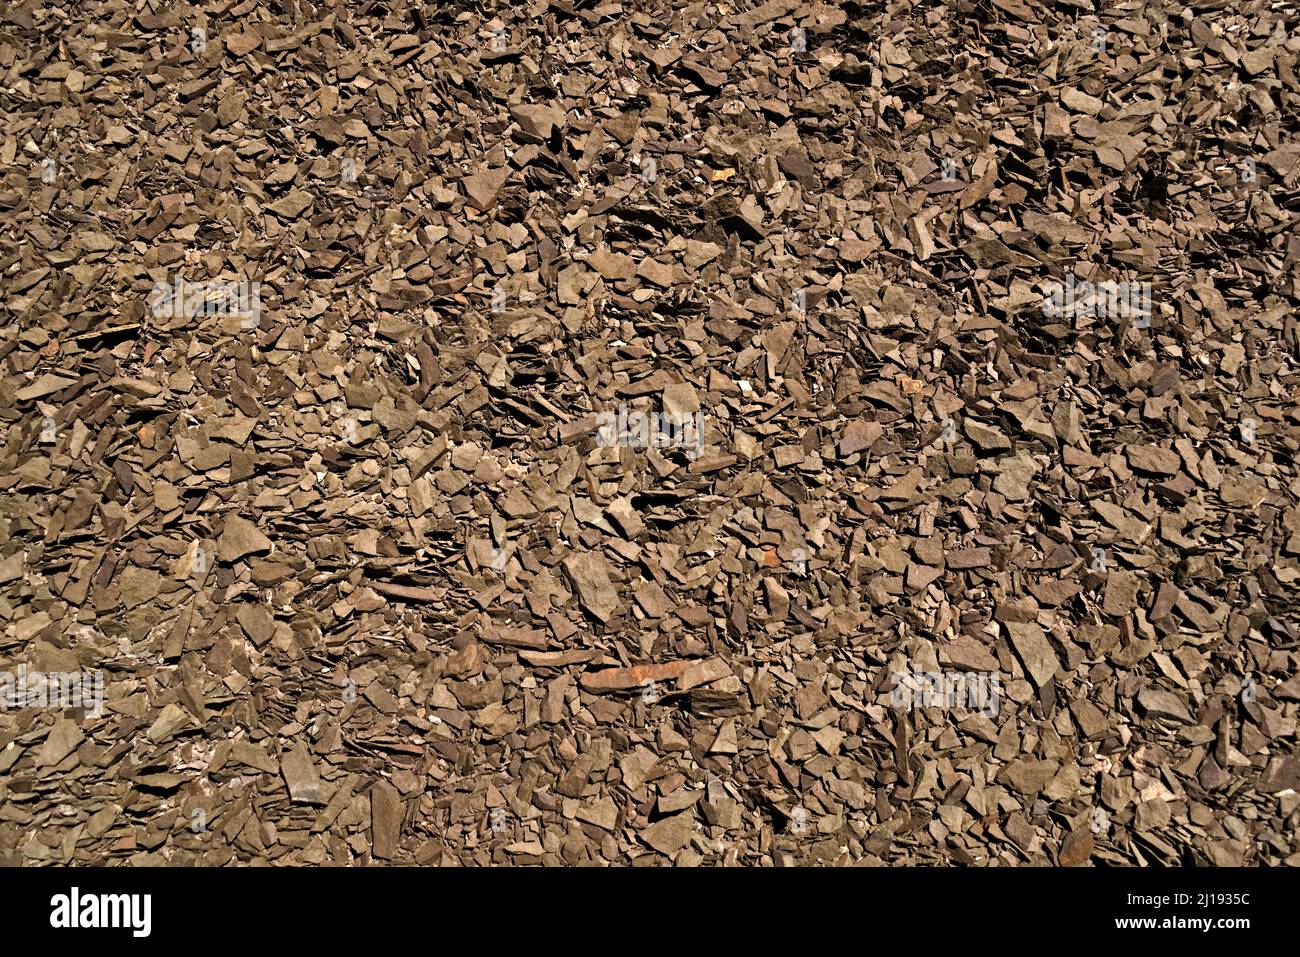 Loose volcanic rocks surface. Full frame texture. Stock Photo